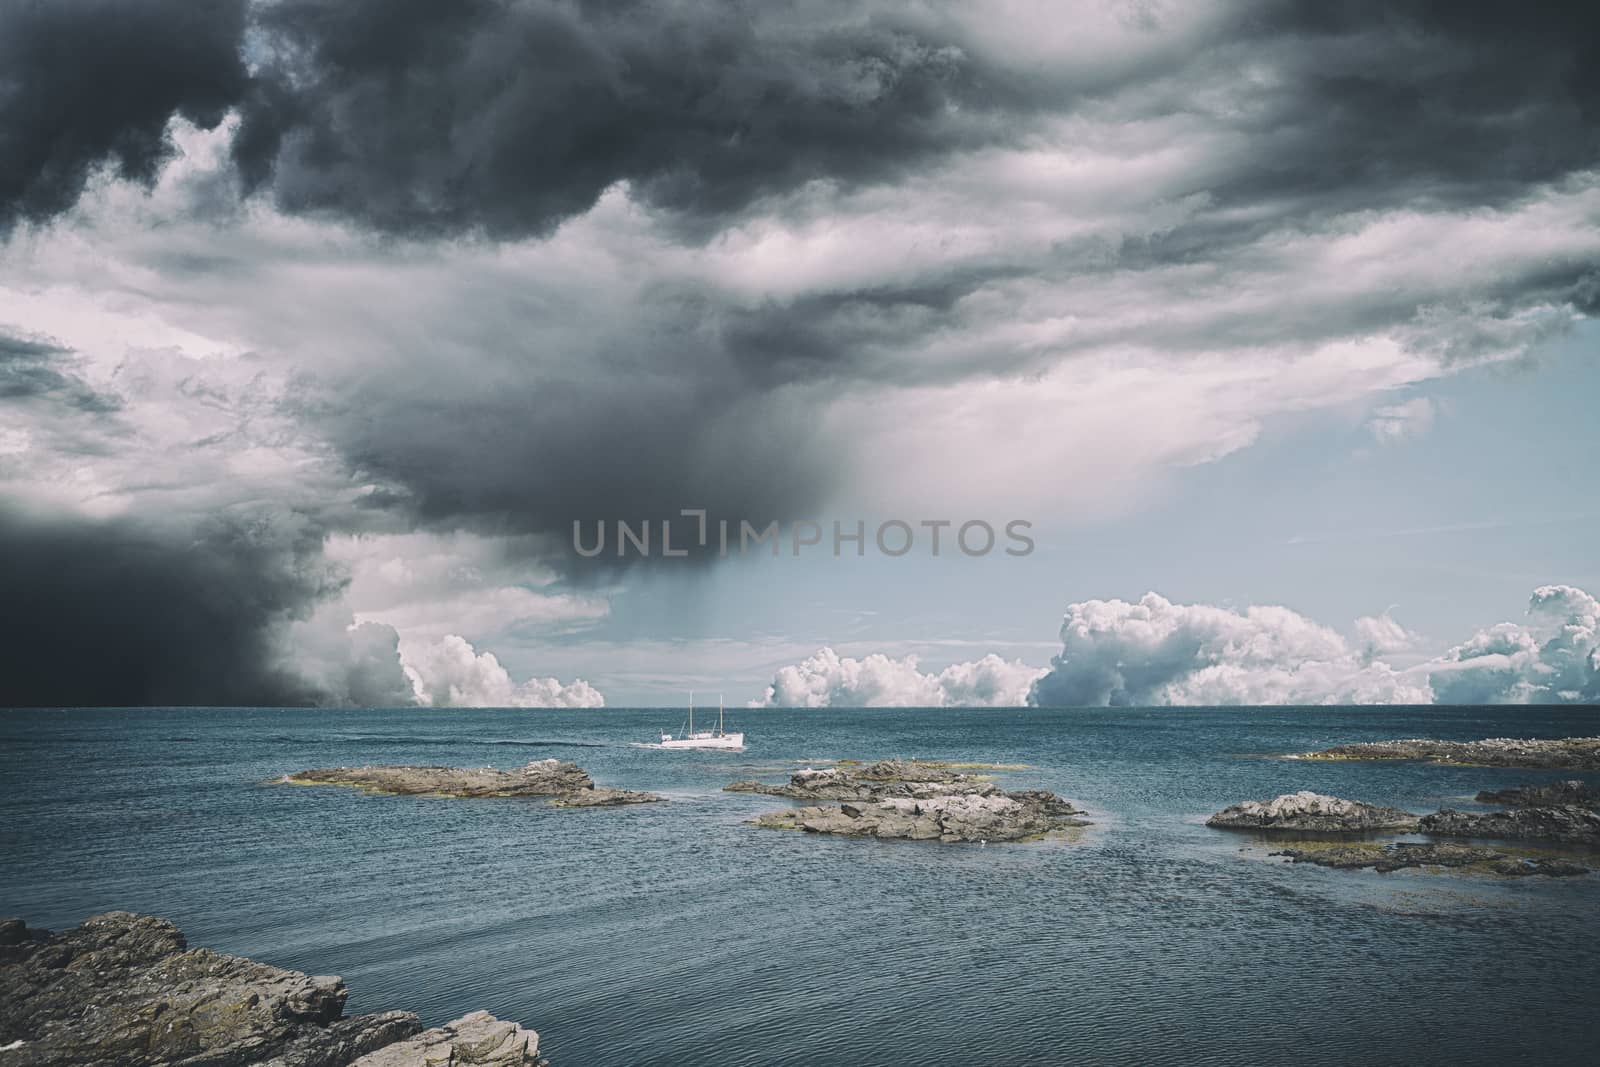 Small boat in dramatic cloudy weather on the sea sailing close to cliffs on the shore